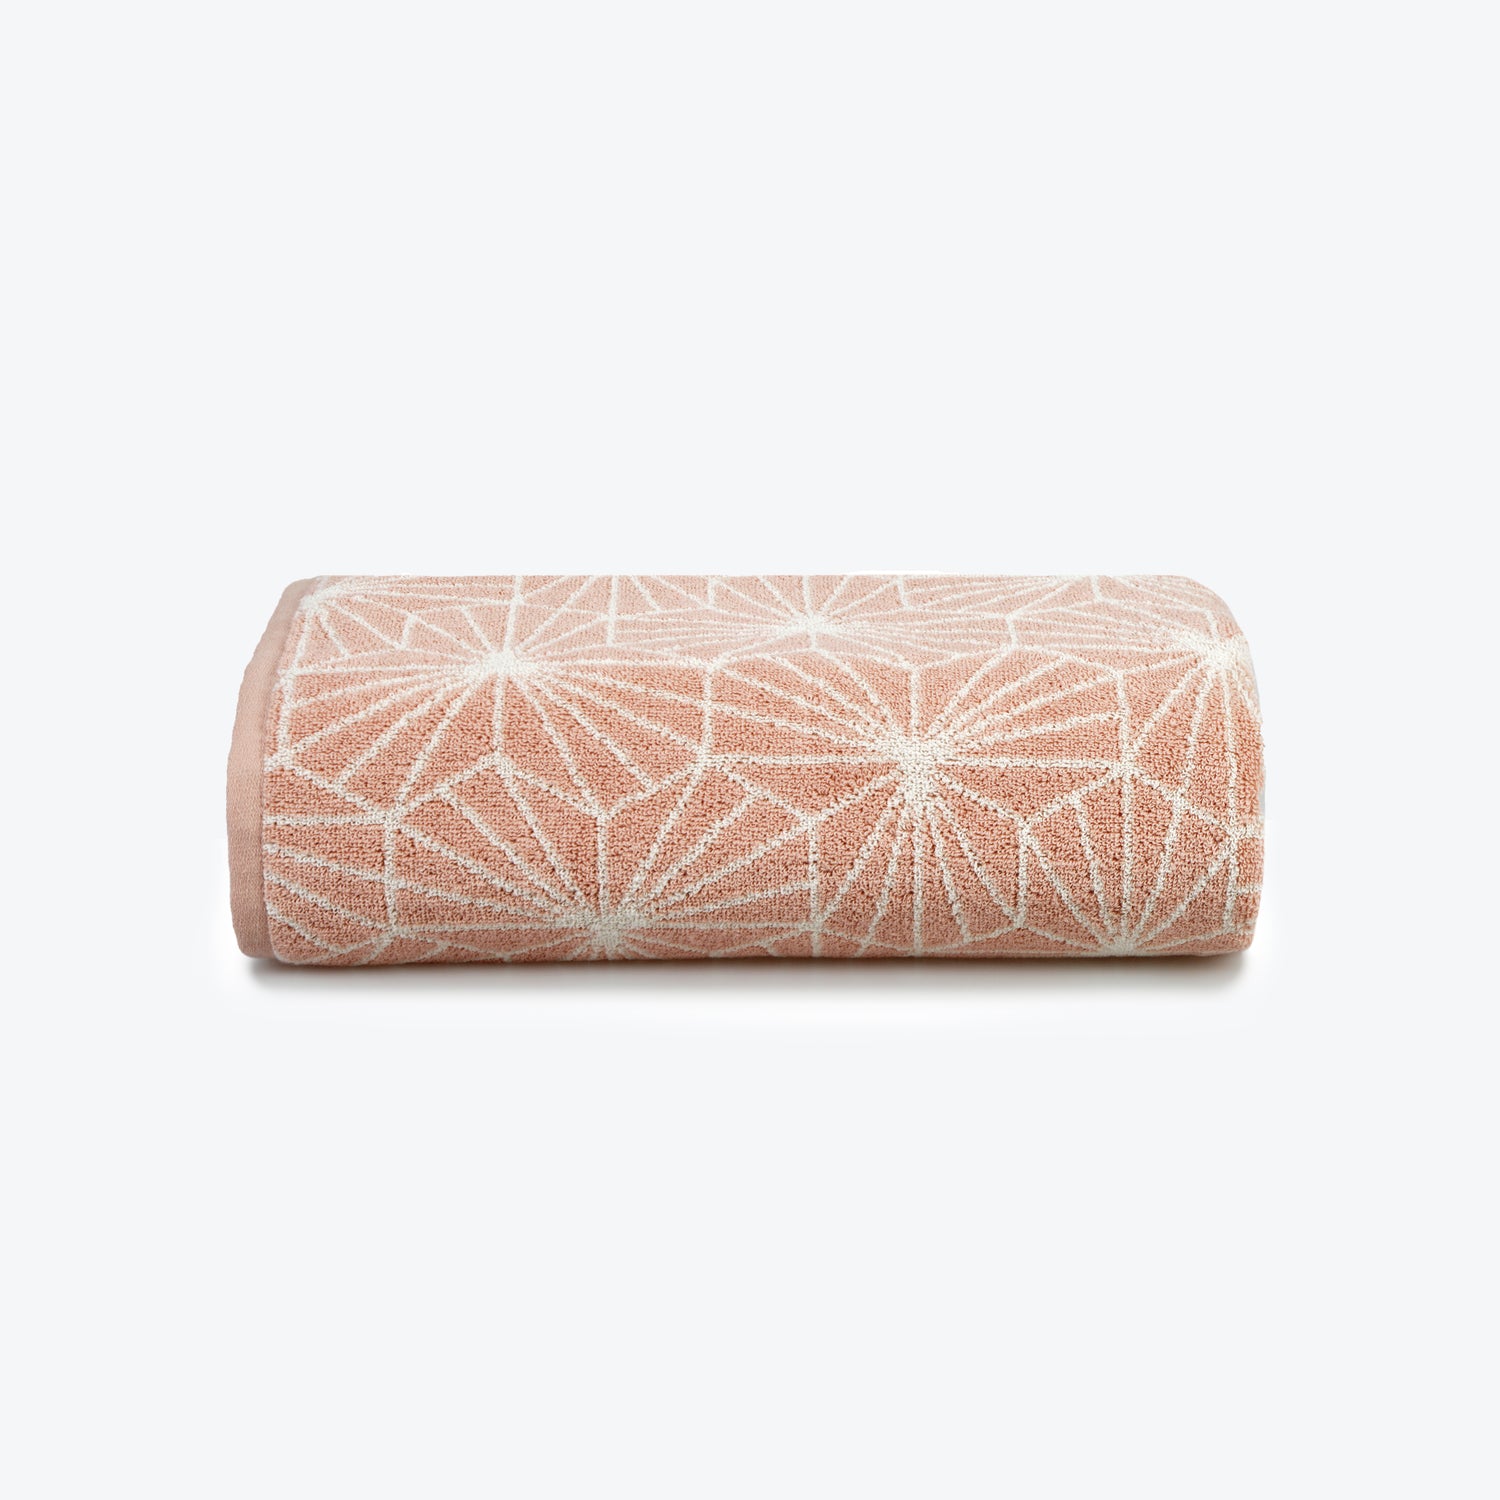 Blush Pink Geometric Towel Bale - Co-ordinated Patterned Bathroom Hand Towels